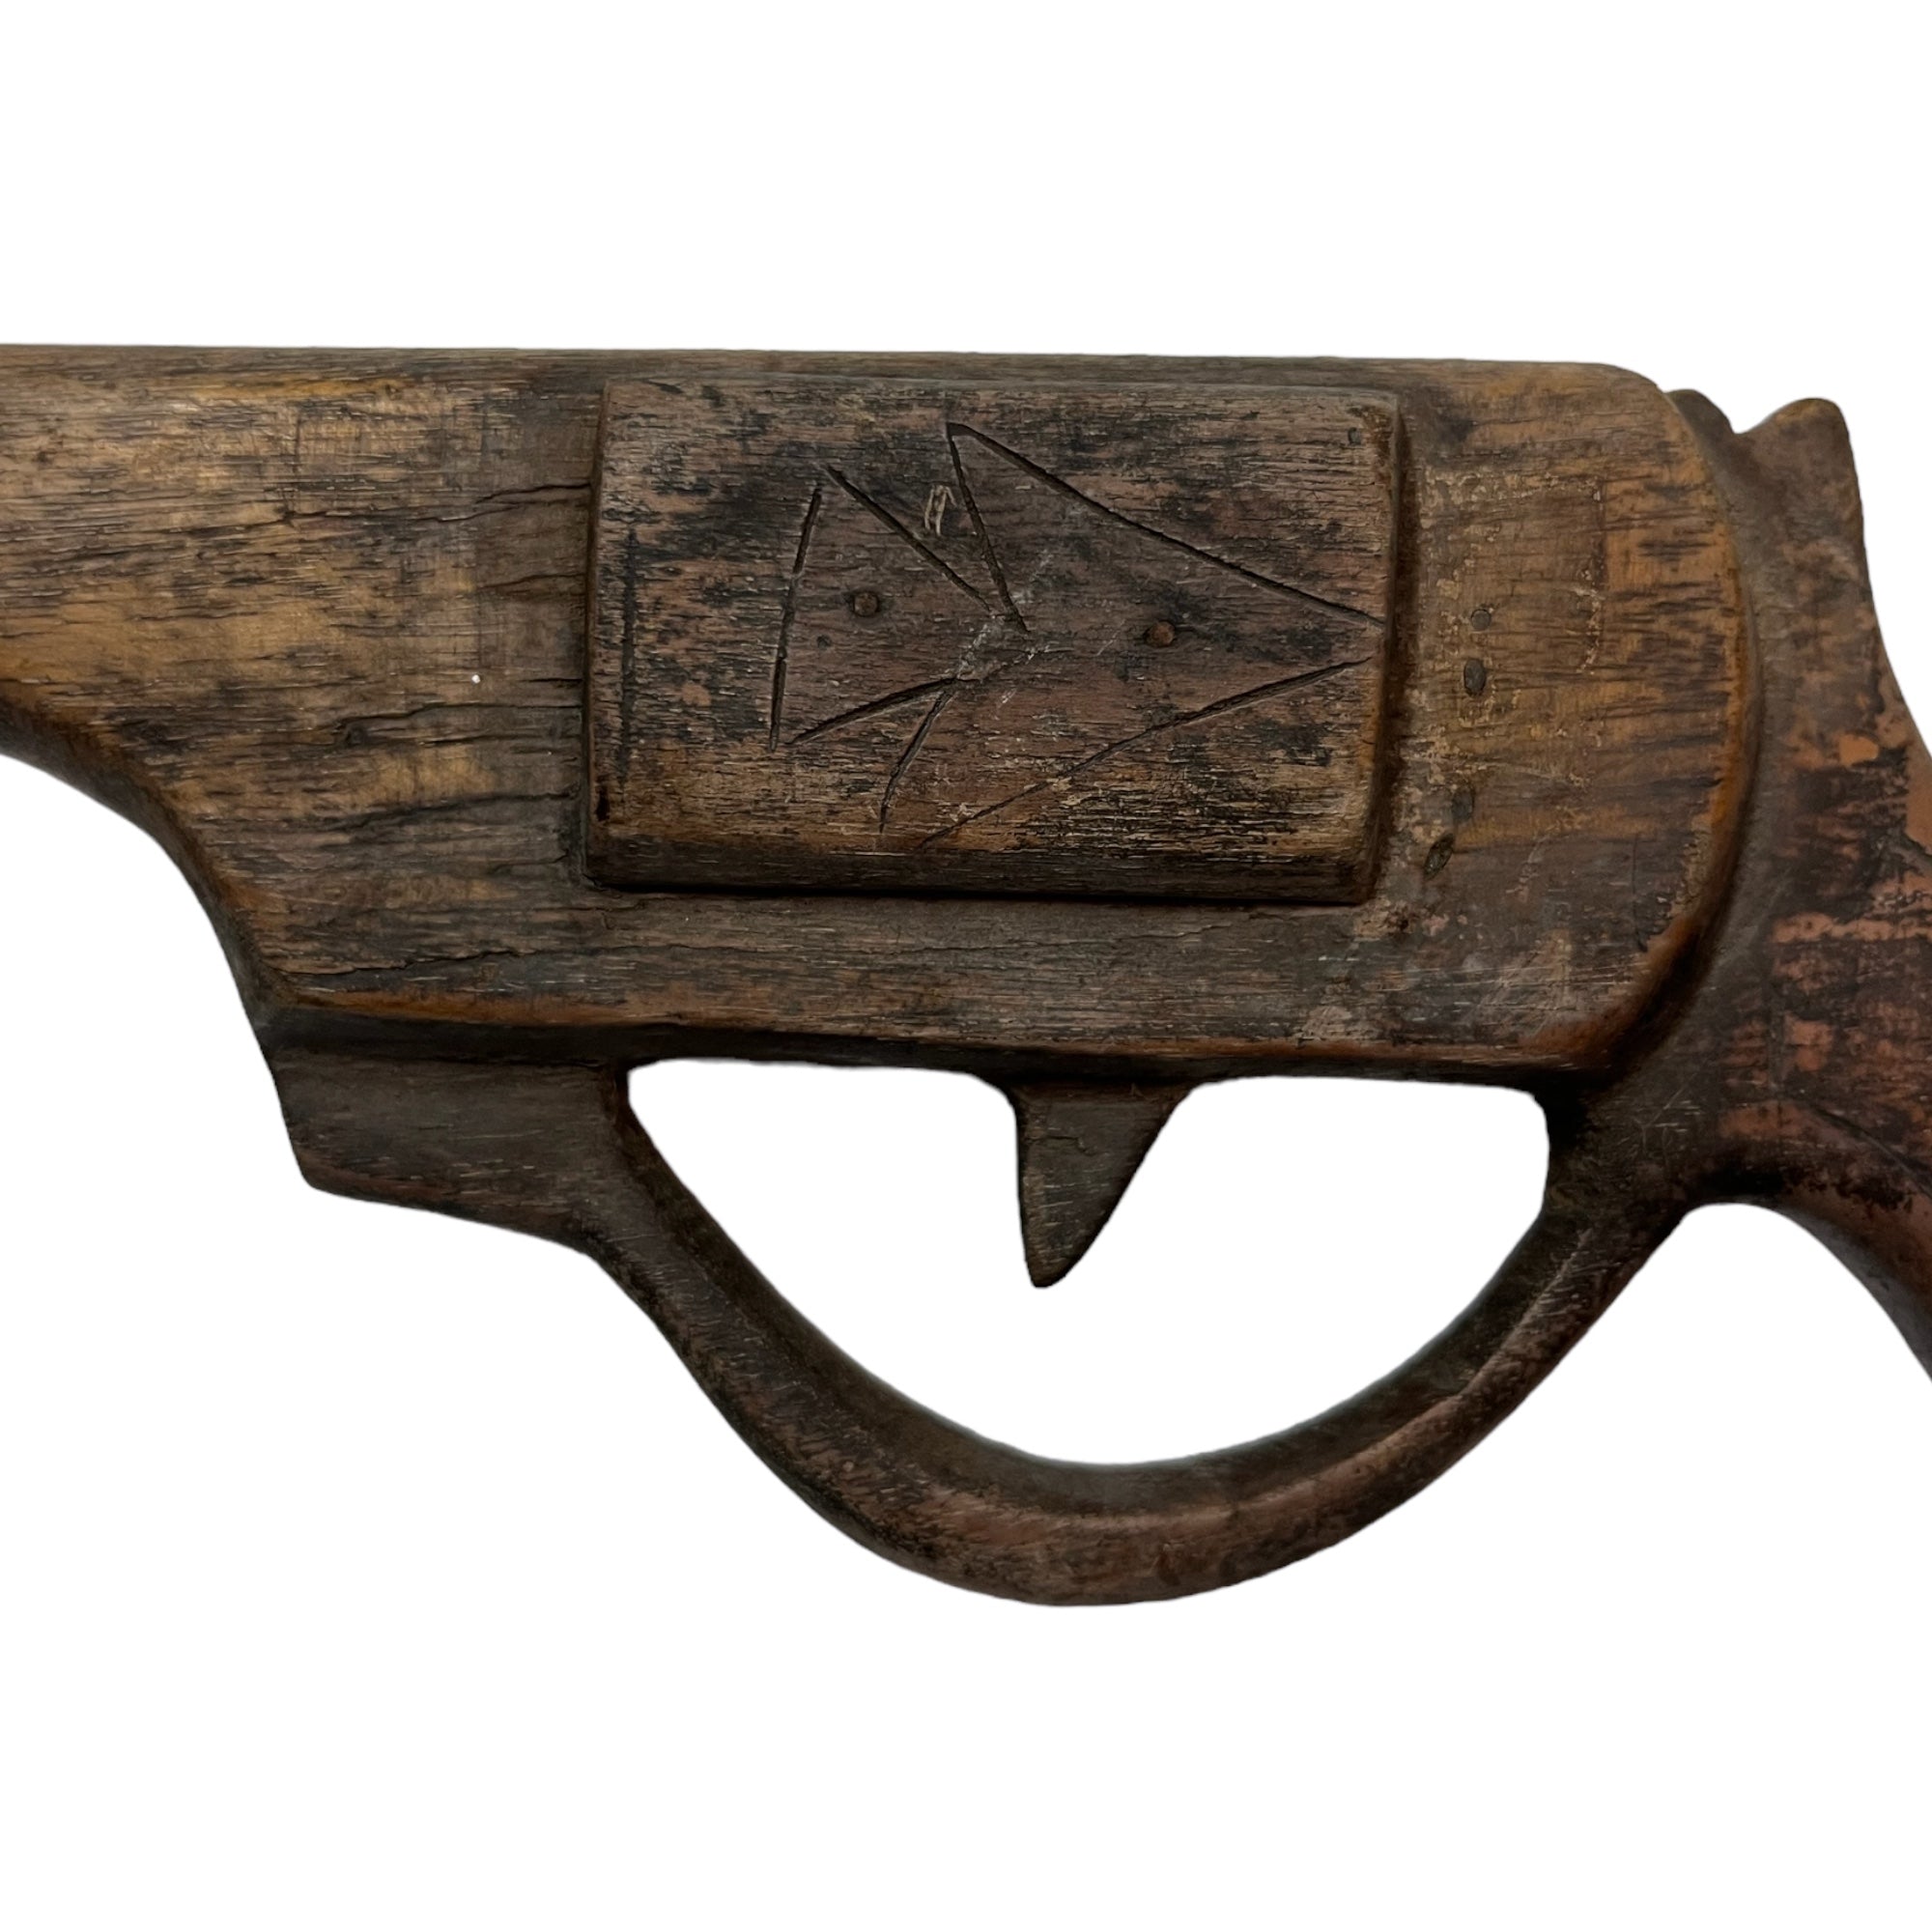 Early 1900s Folk Art Hand Carved Revolver